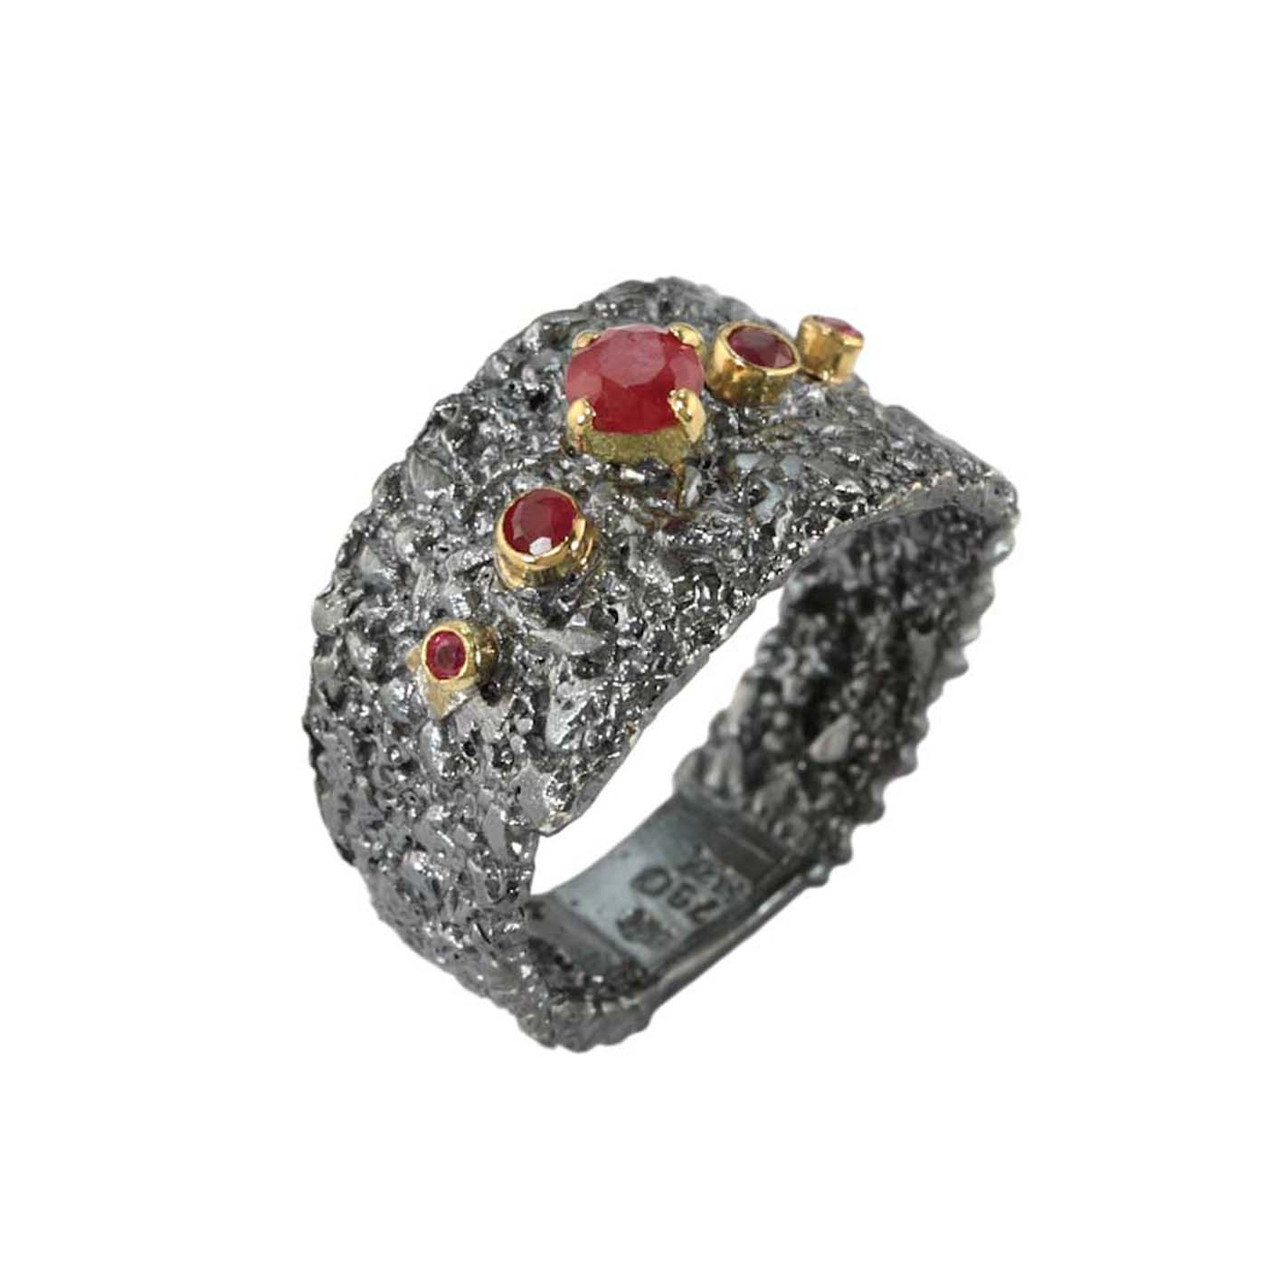 Oxidised Silver & Ruby Textured Wide Ring, Apostolos, tomfoolery